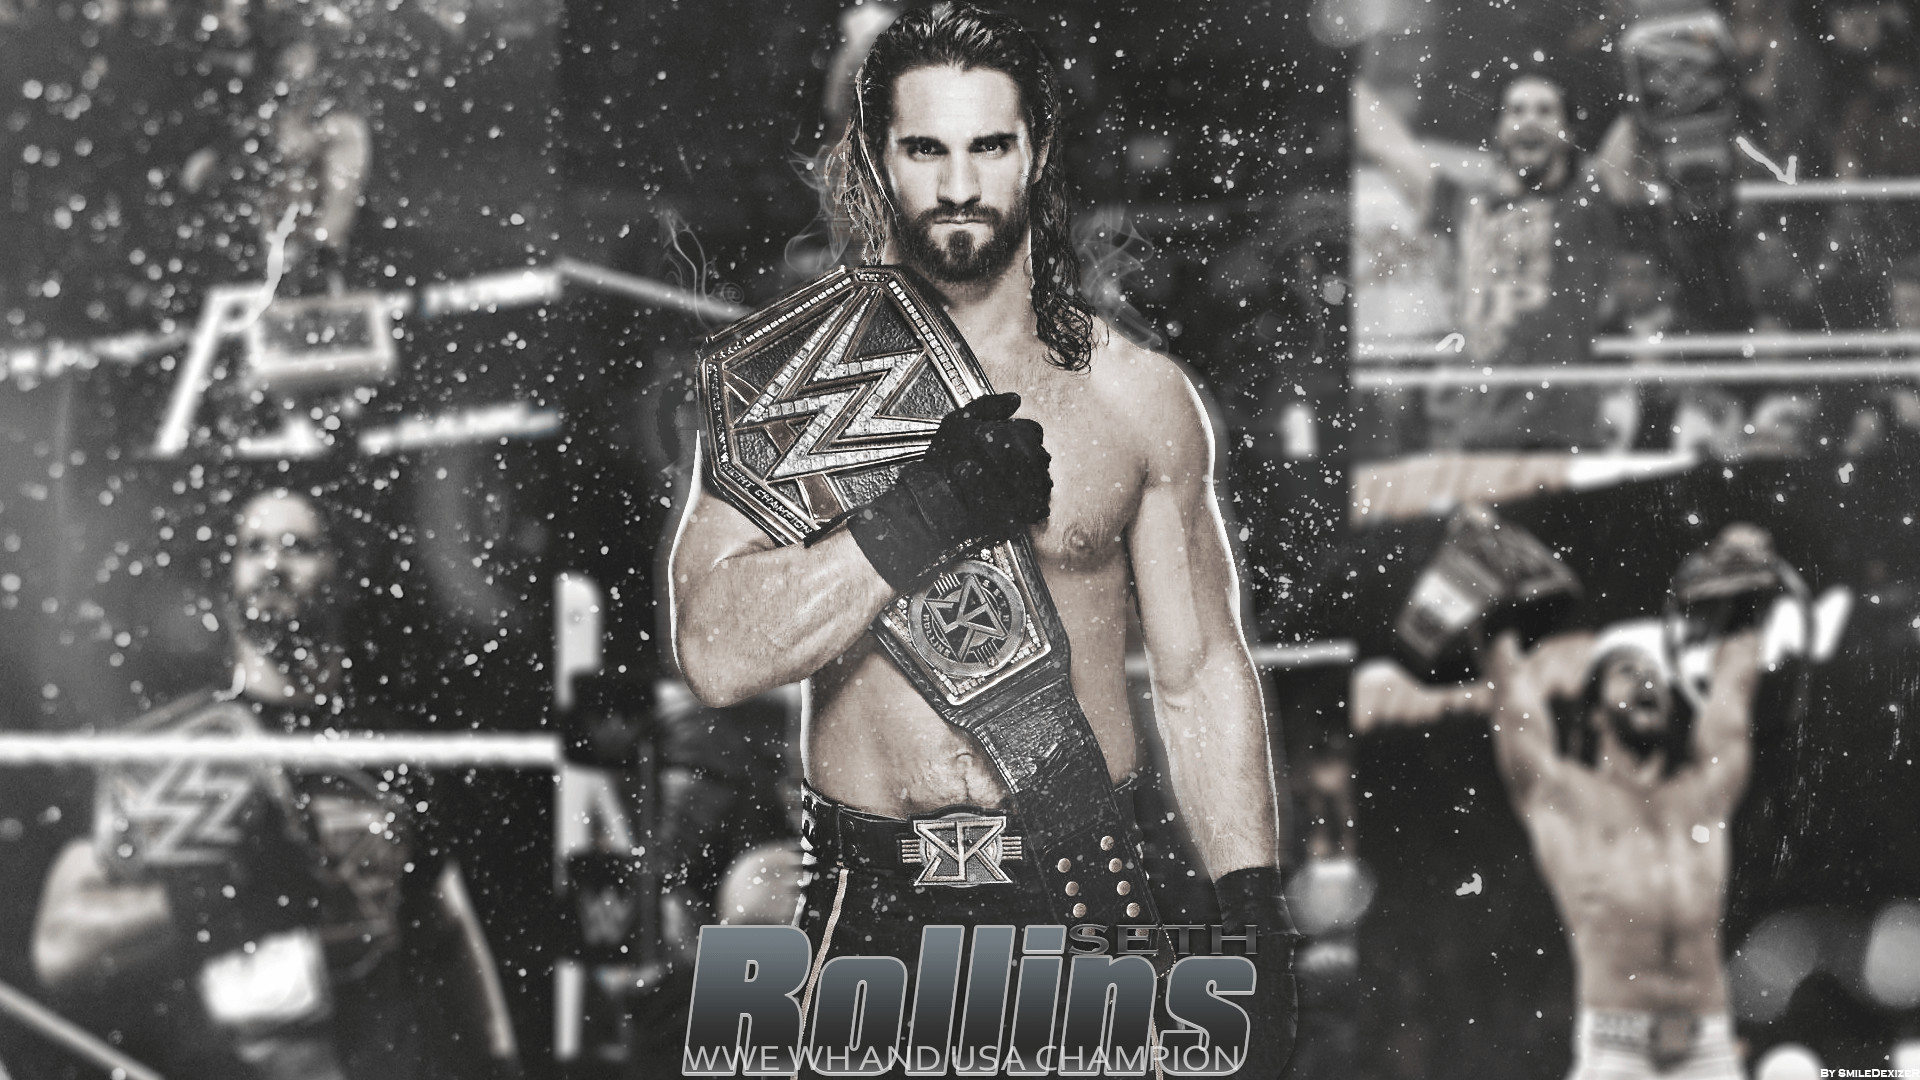 1920x1080 Seth Rollins Wallpapers, Top Beautiful Seth Rollins Images, 215 .